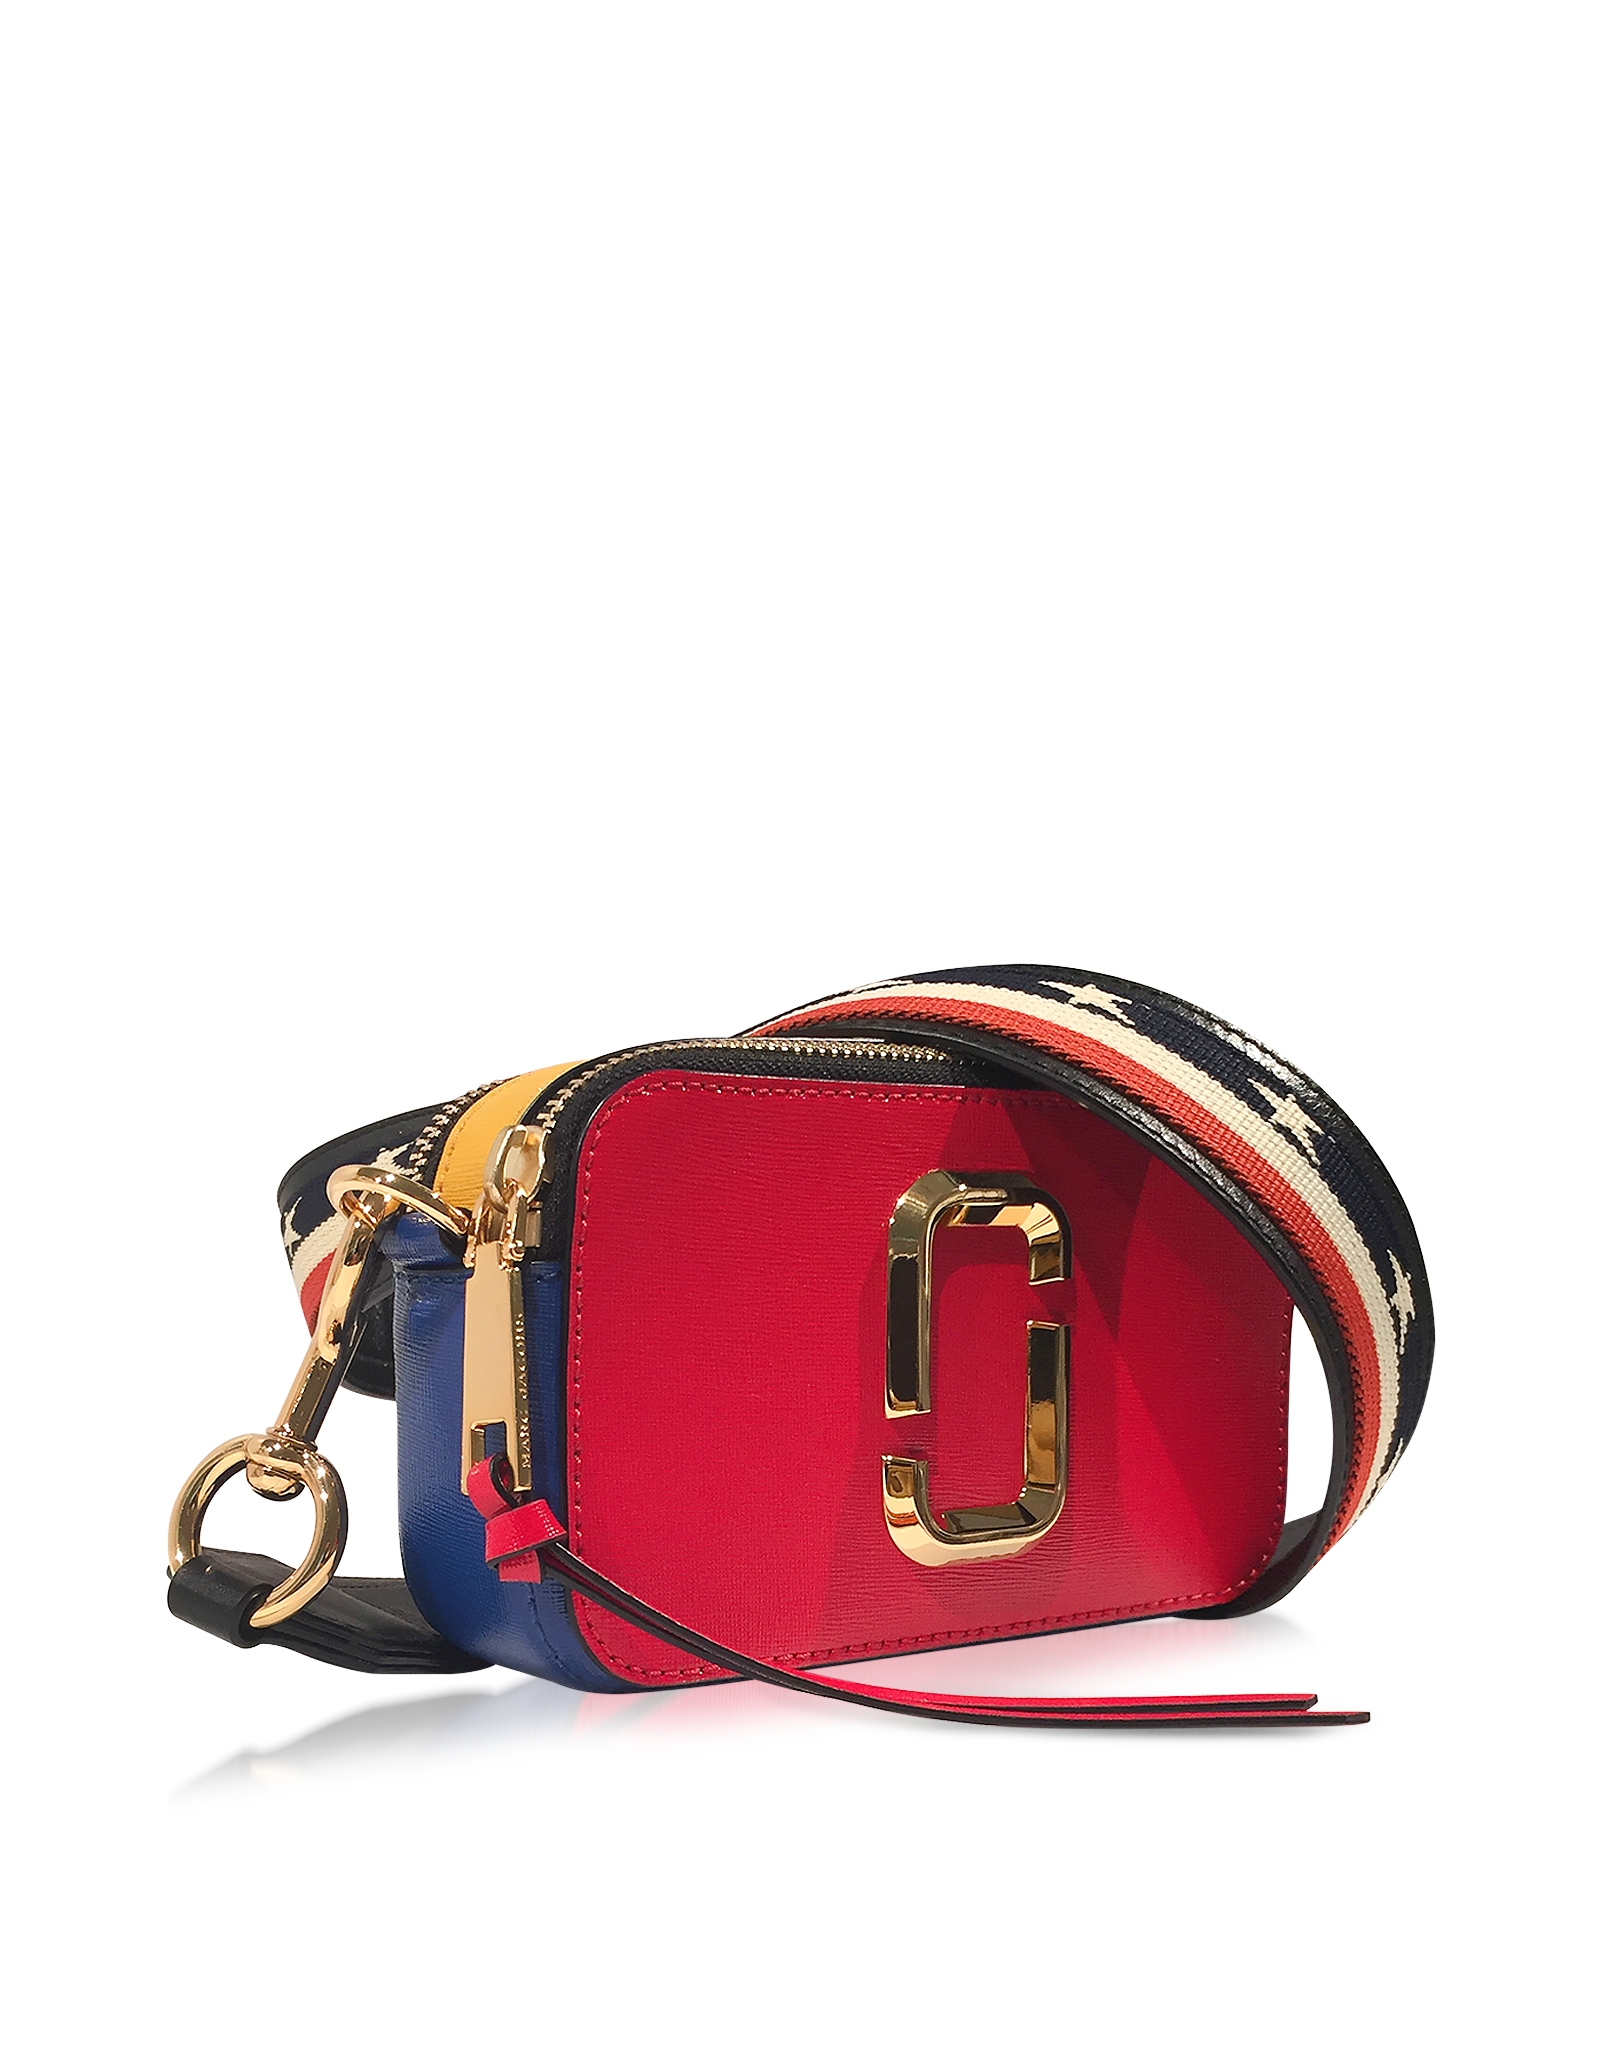 Marc Jacobs Snapshot Red Pepper Saffiano Leather Small Camera Bag in Red - Lyst